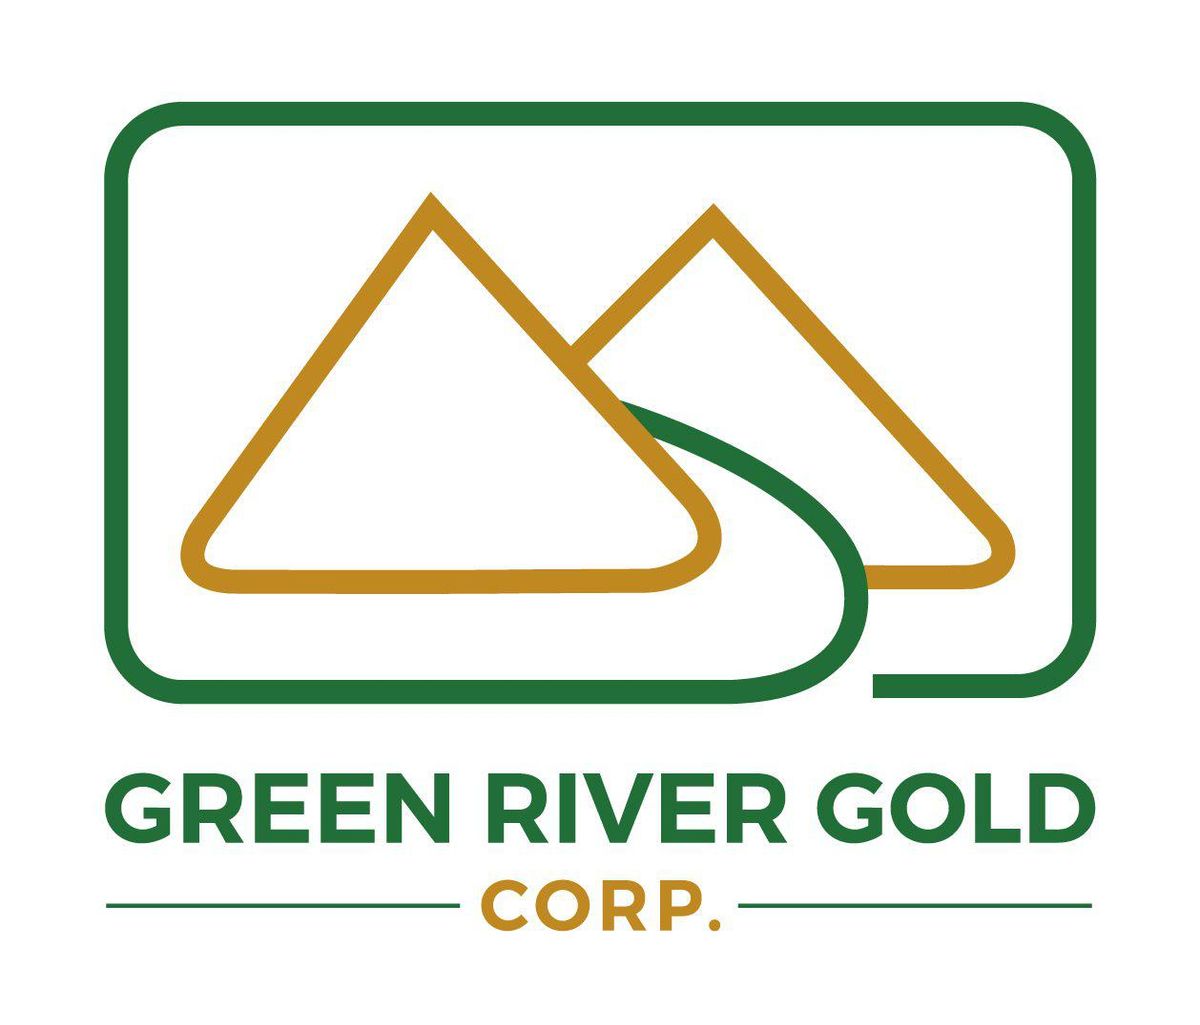 Green River Gold Corp. Announces Final Closing of Its Oversubscribed Non-Brokered Private Placement of Units and the Closing of Its Non-Brokered Private Placement of Flow-Through Shares